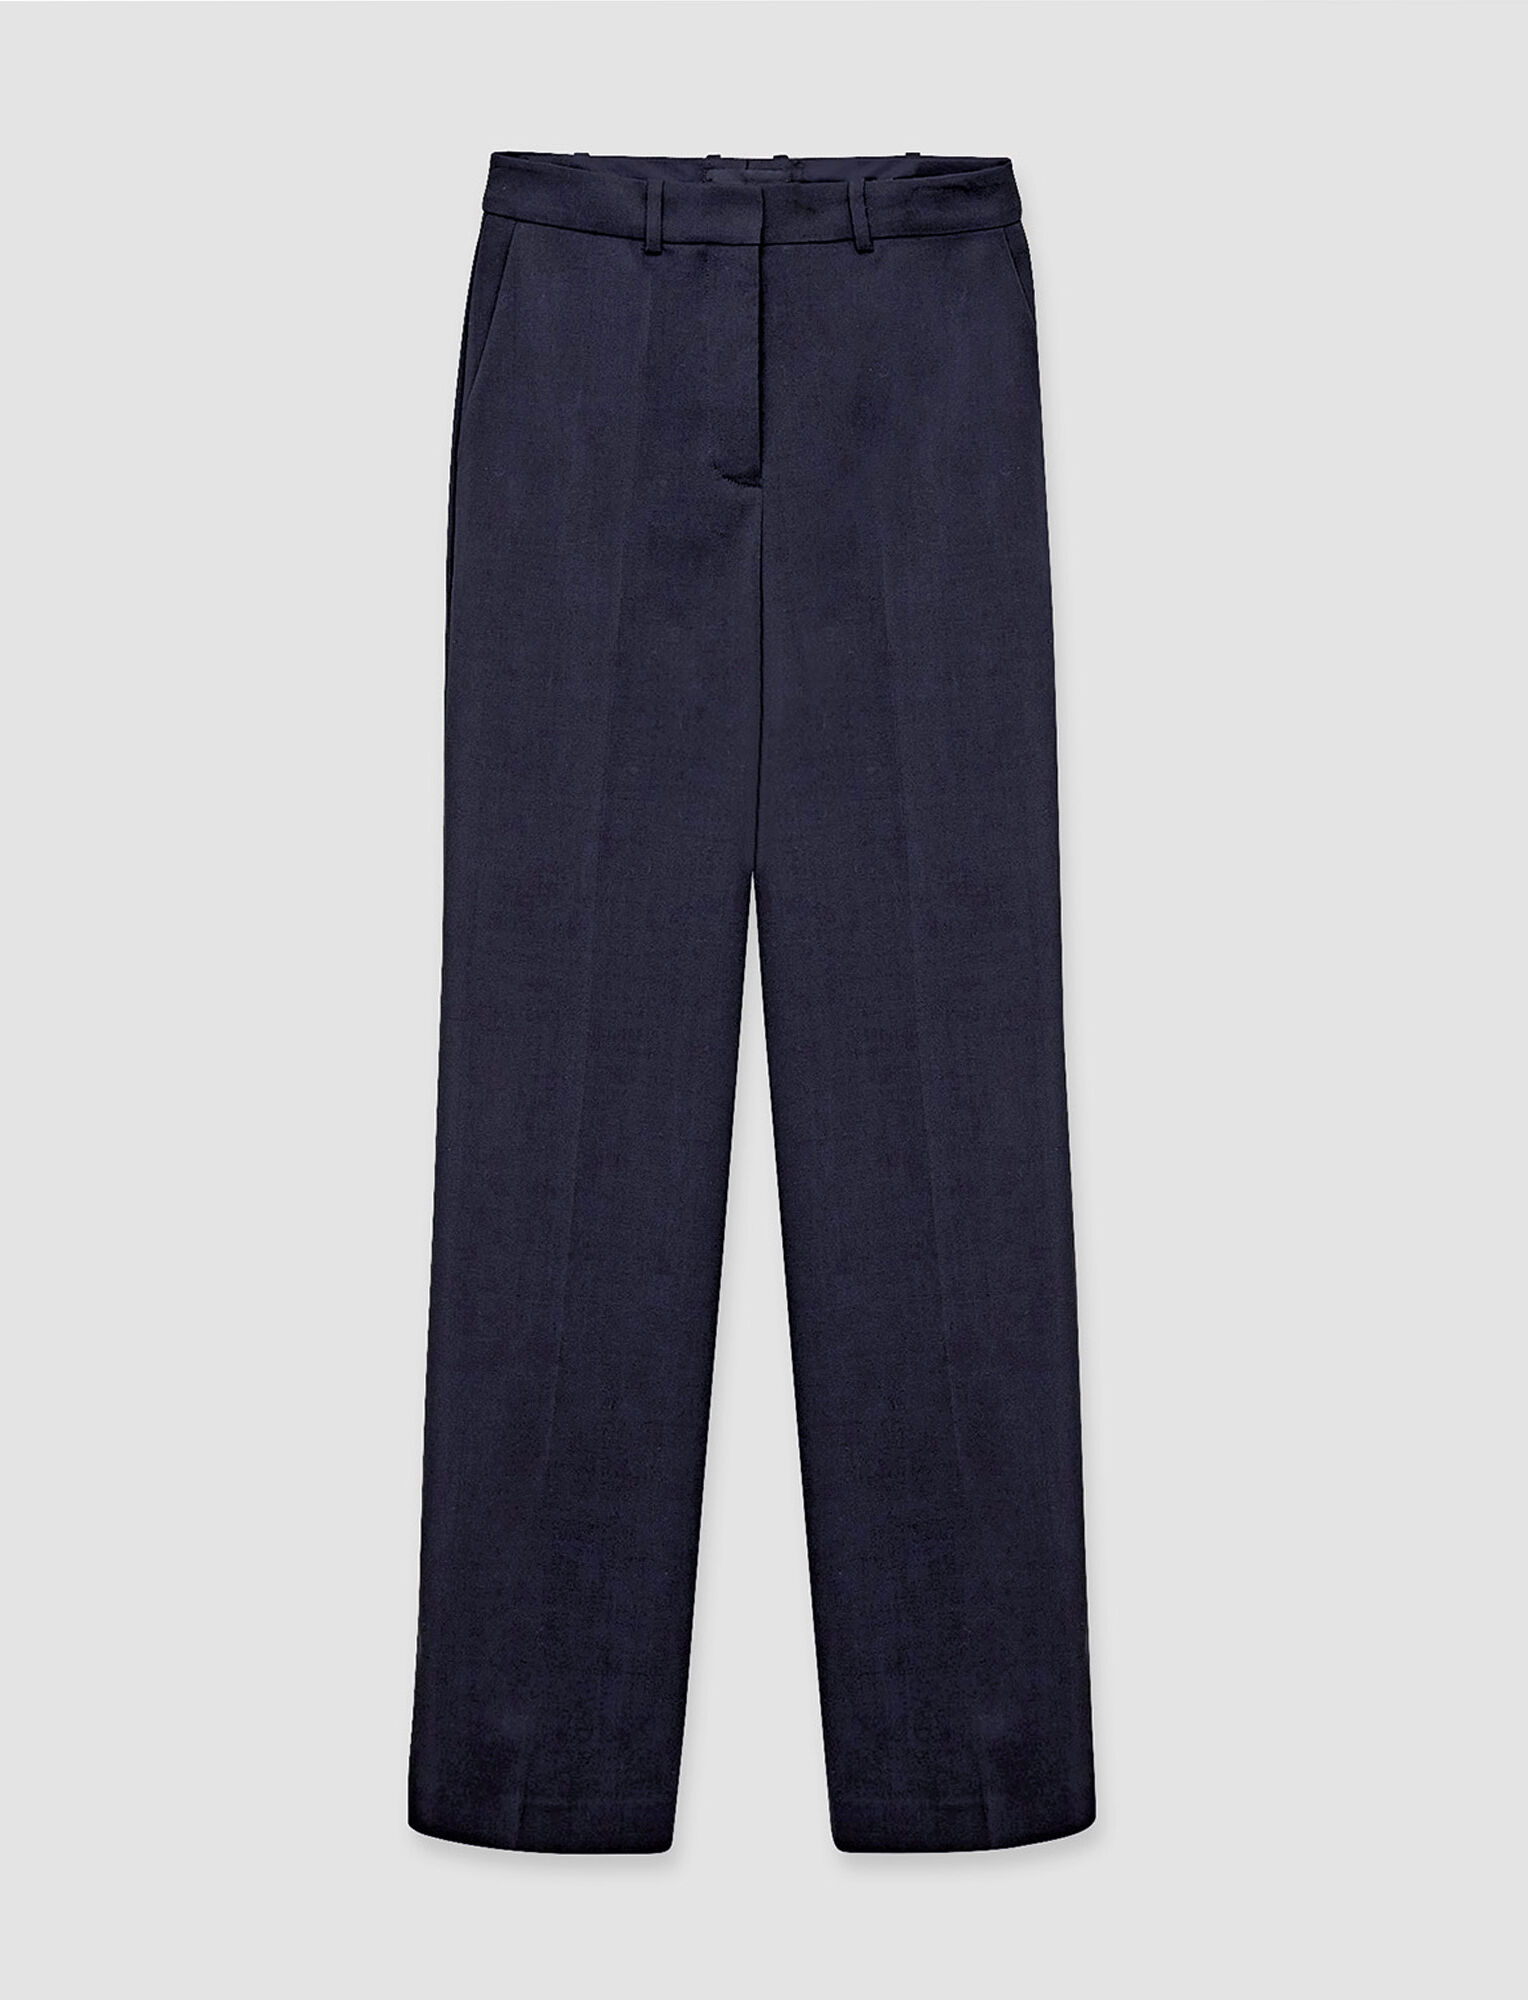 Joseph Tailoring Wool Stretch Coleman Trousers In Navy